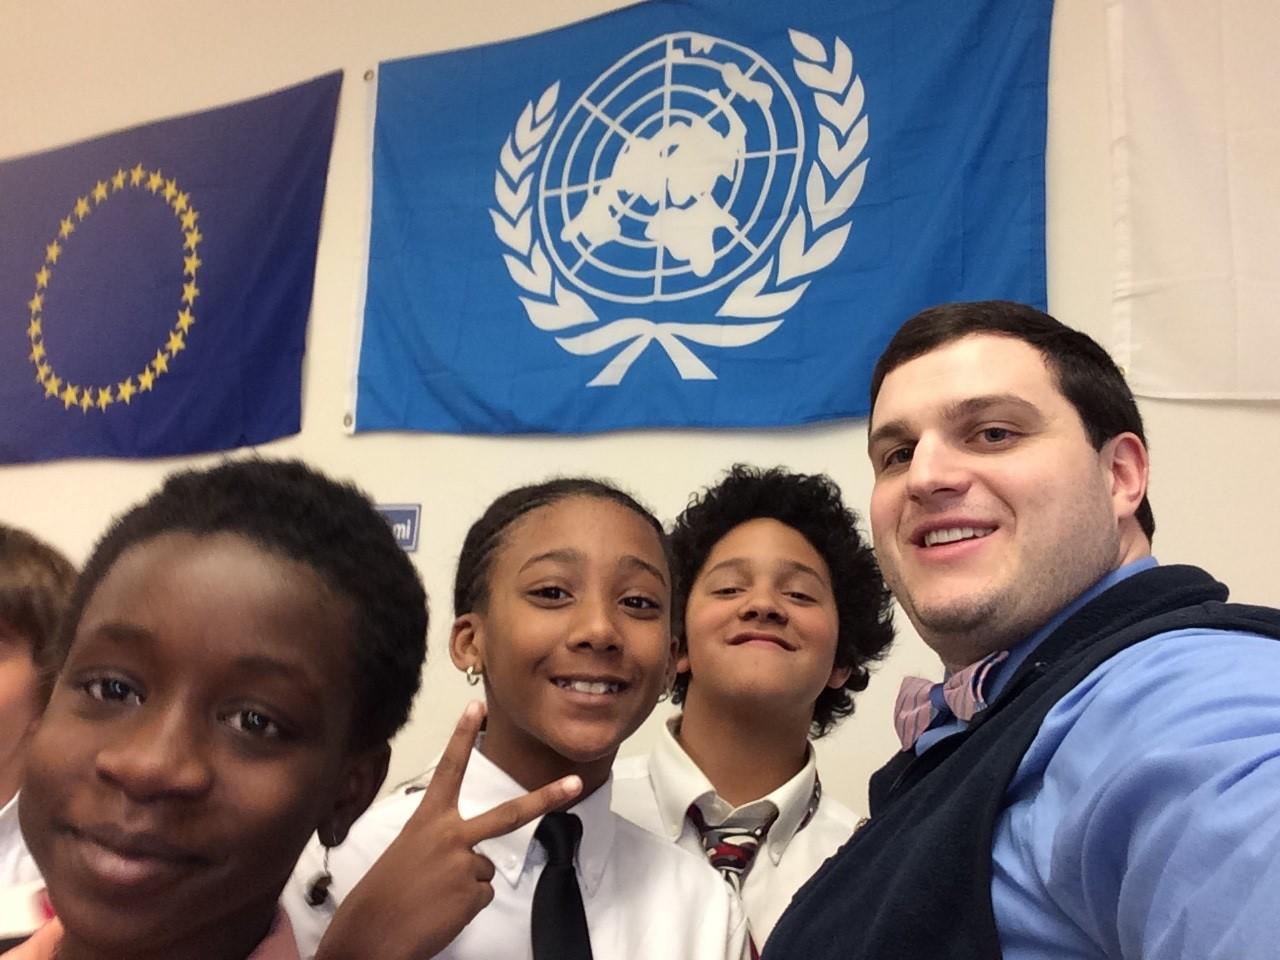 Mr. Martini with his students.